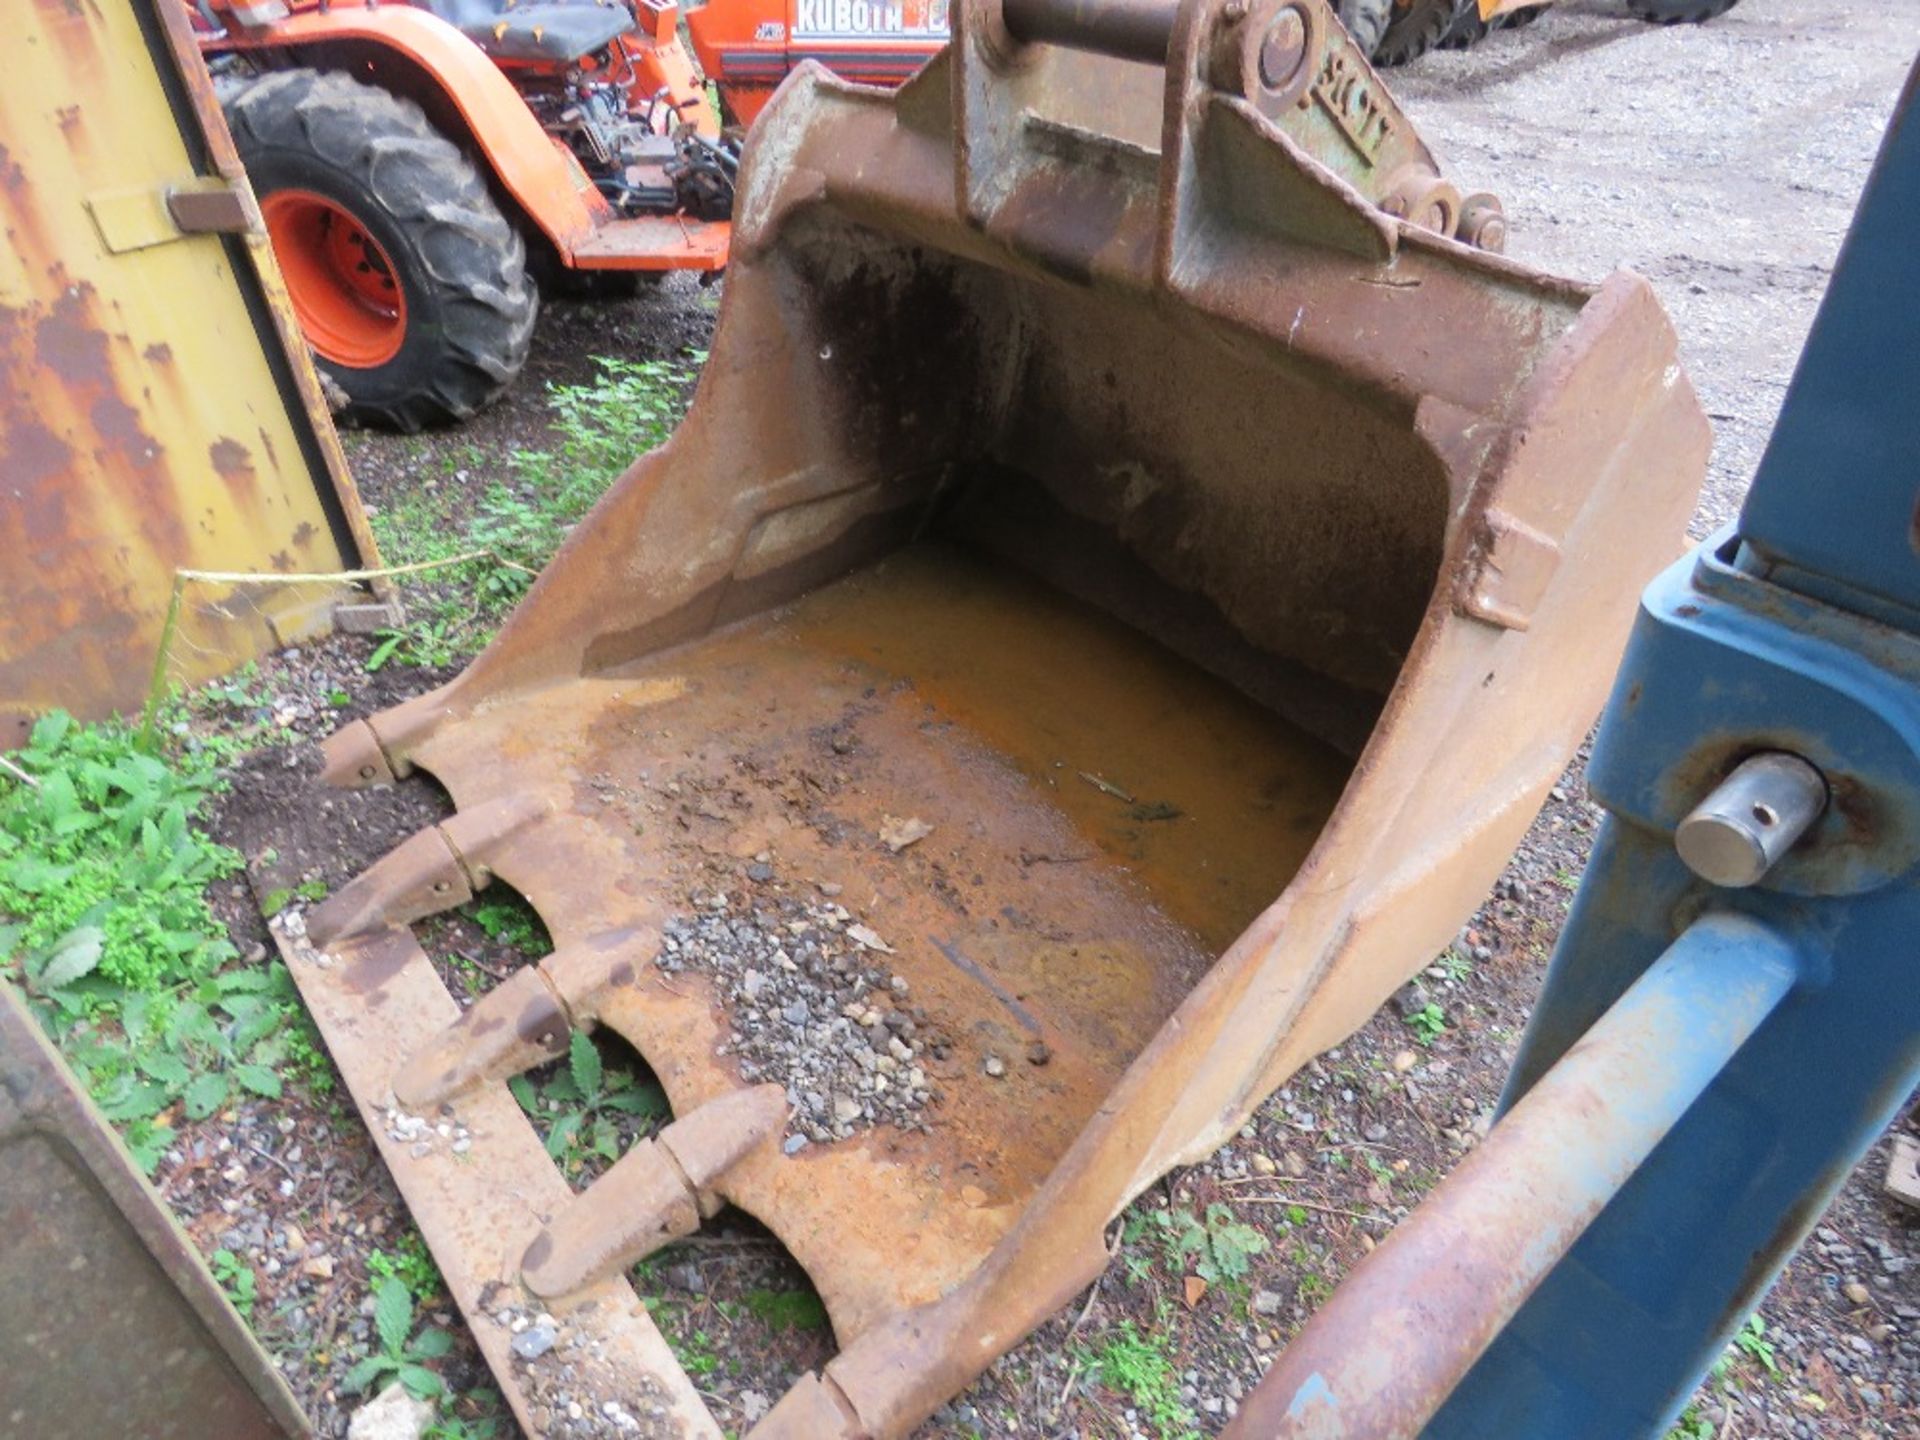 LARGE TOOTHE EXCAVATOR BUCKET 5FT WIDTH APPROX ON 80MM PINS. THIS LOT IS SOLD UNDER THE AUCTIONE